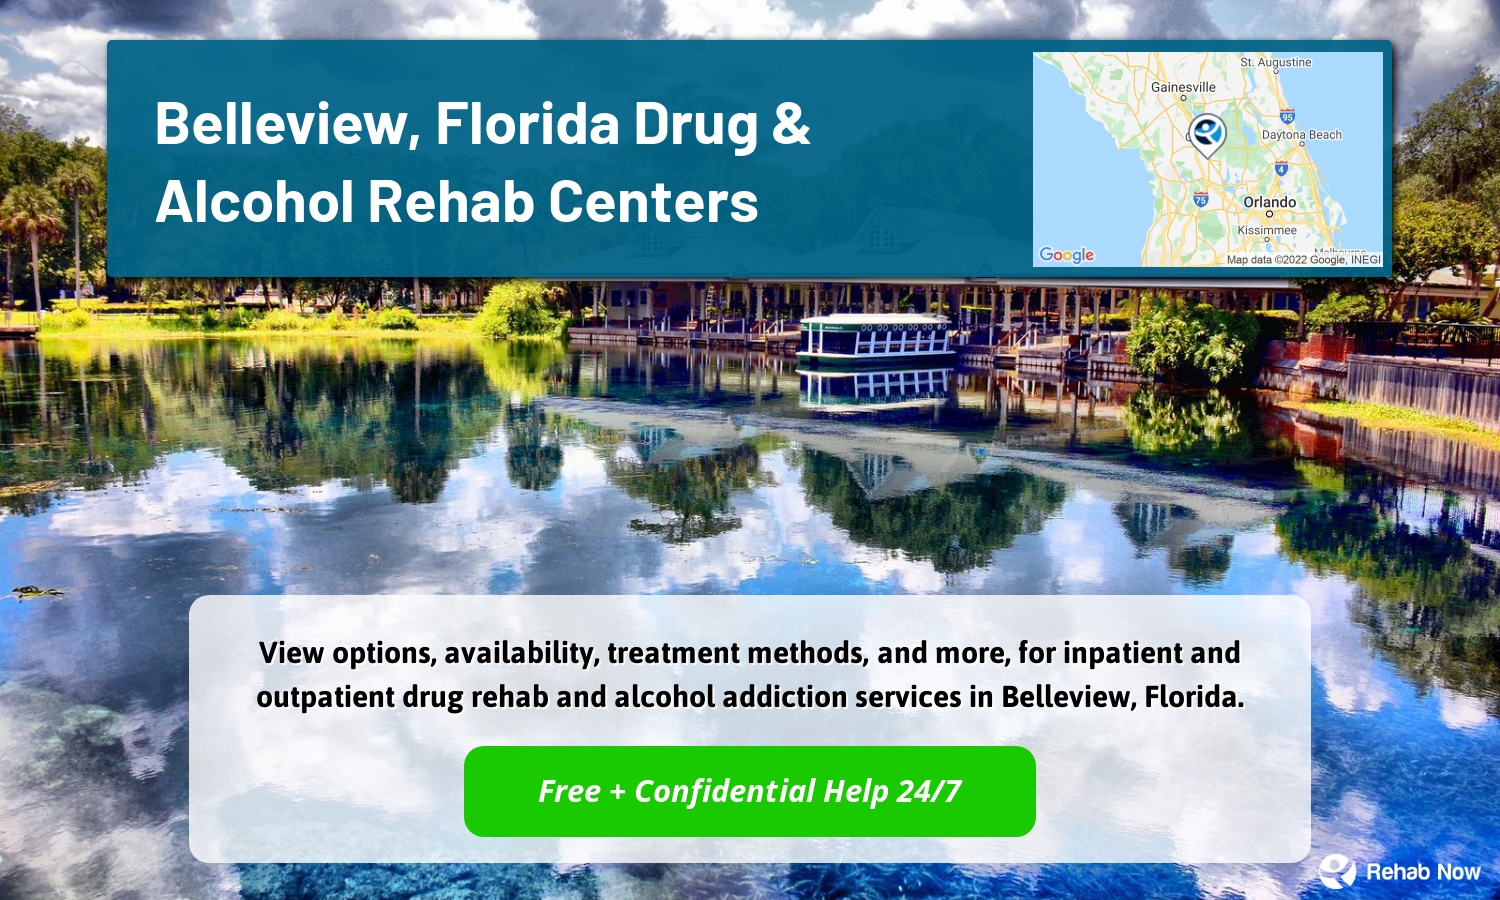 View options, availability, treatment methods, and more, for inpatient and outpatient drug rehab and alcohol addiction services in Belleview, Florida.